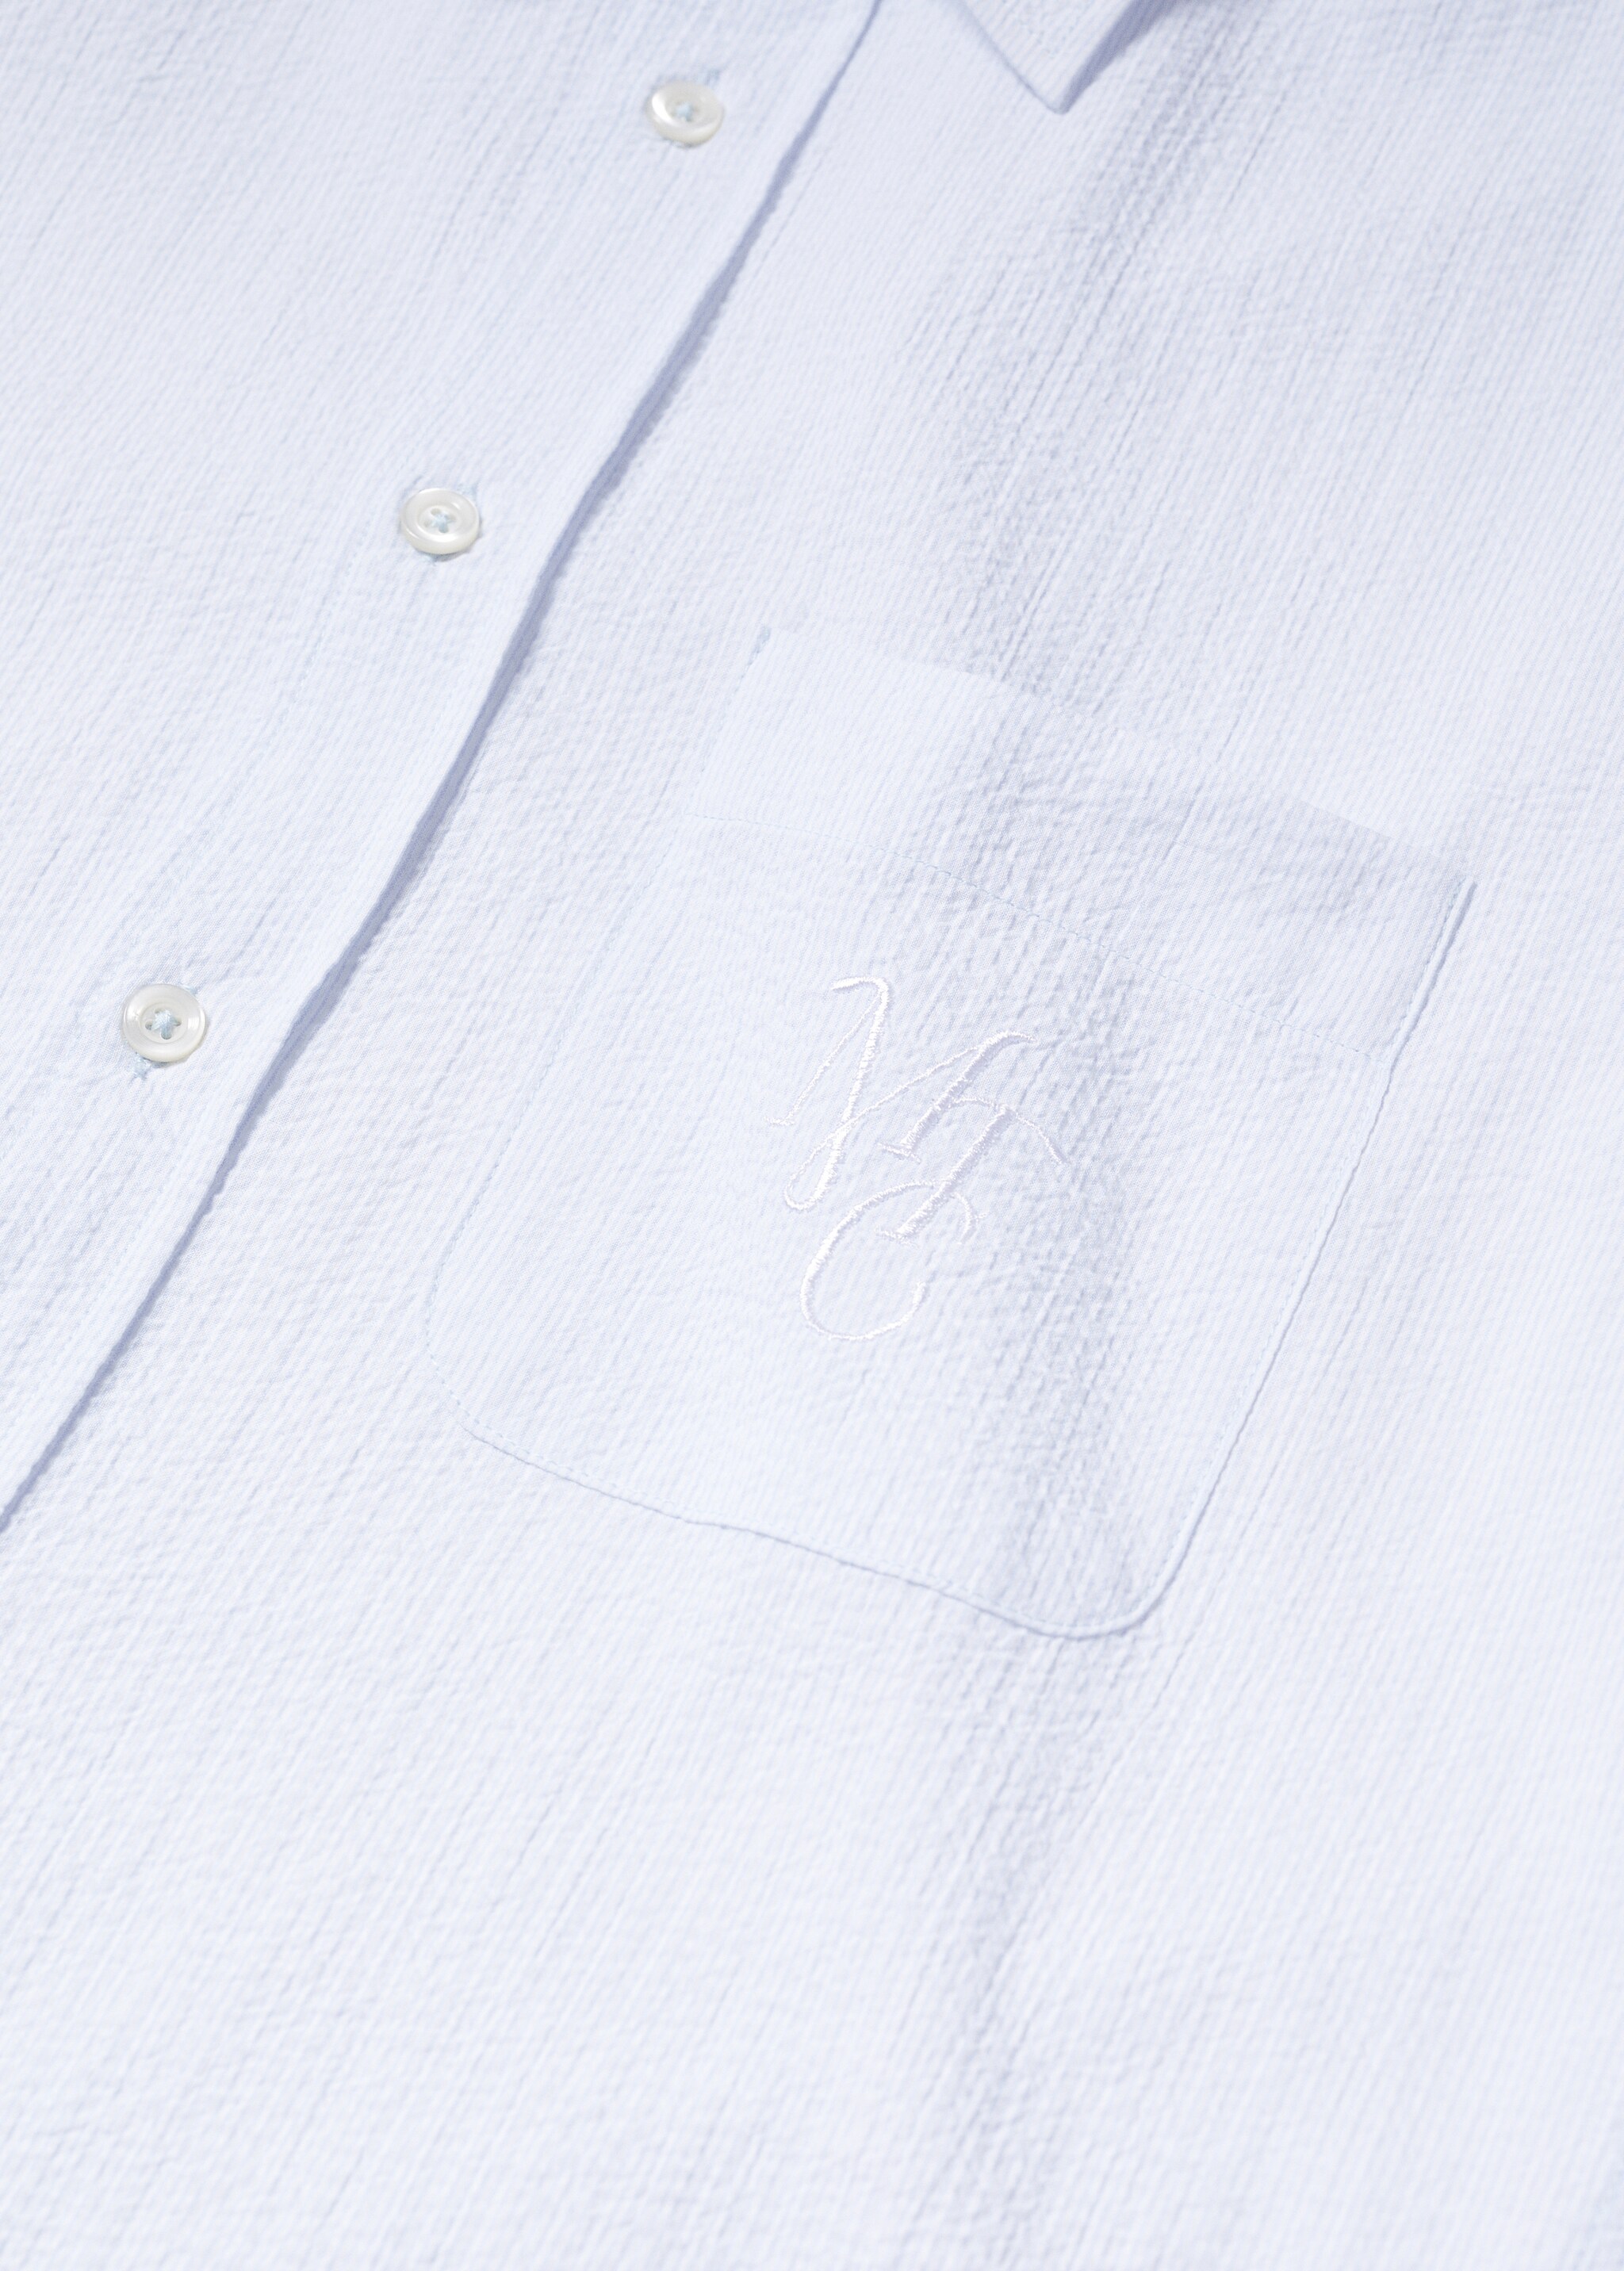 Pocket textured shirt - Details of the article 8